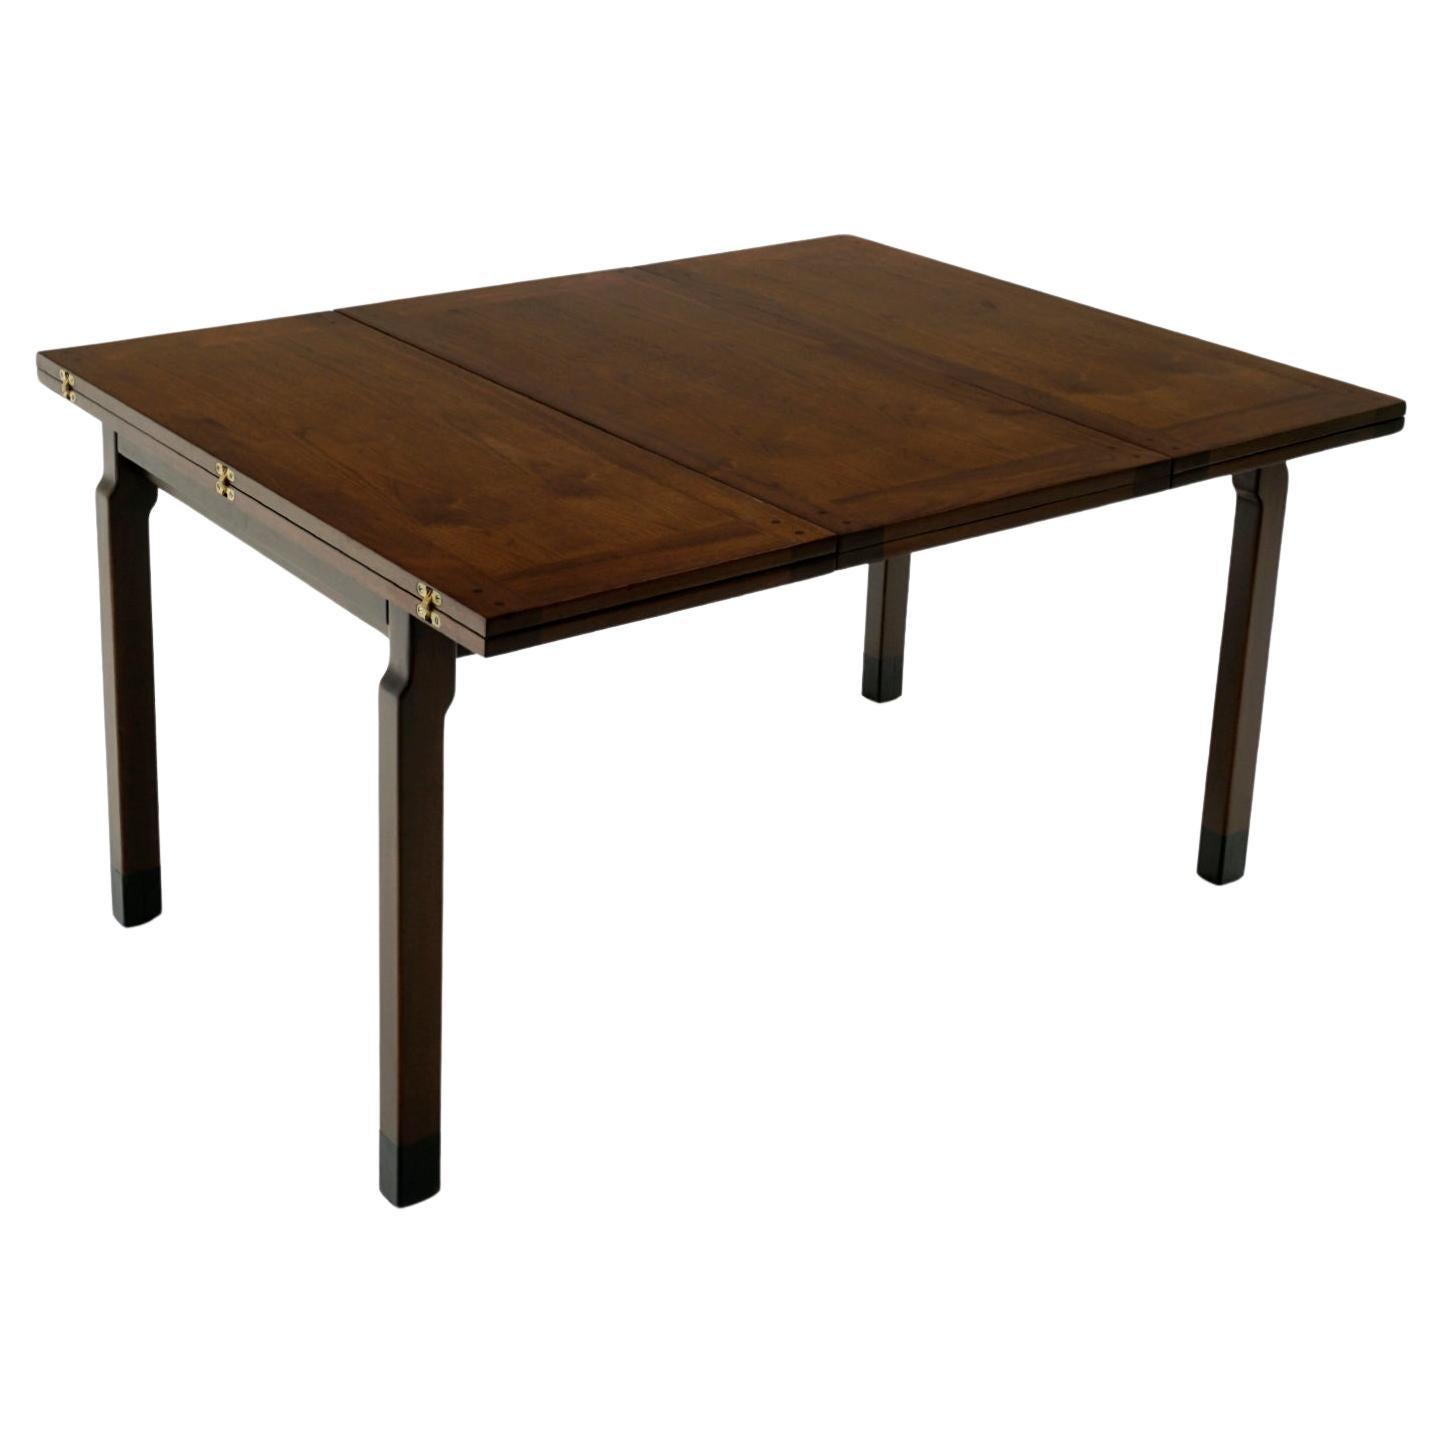 Dunbar Extension Dining Table. Walnut with Two 15 Inch Stored Leaves, SEE VIDEO! For Sale